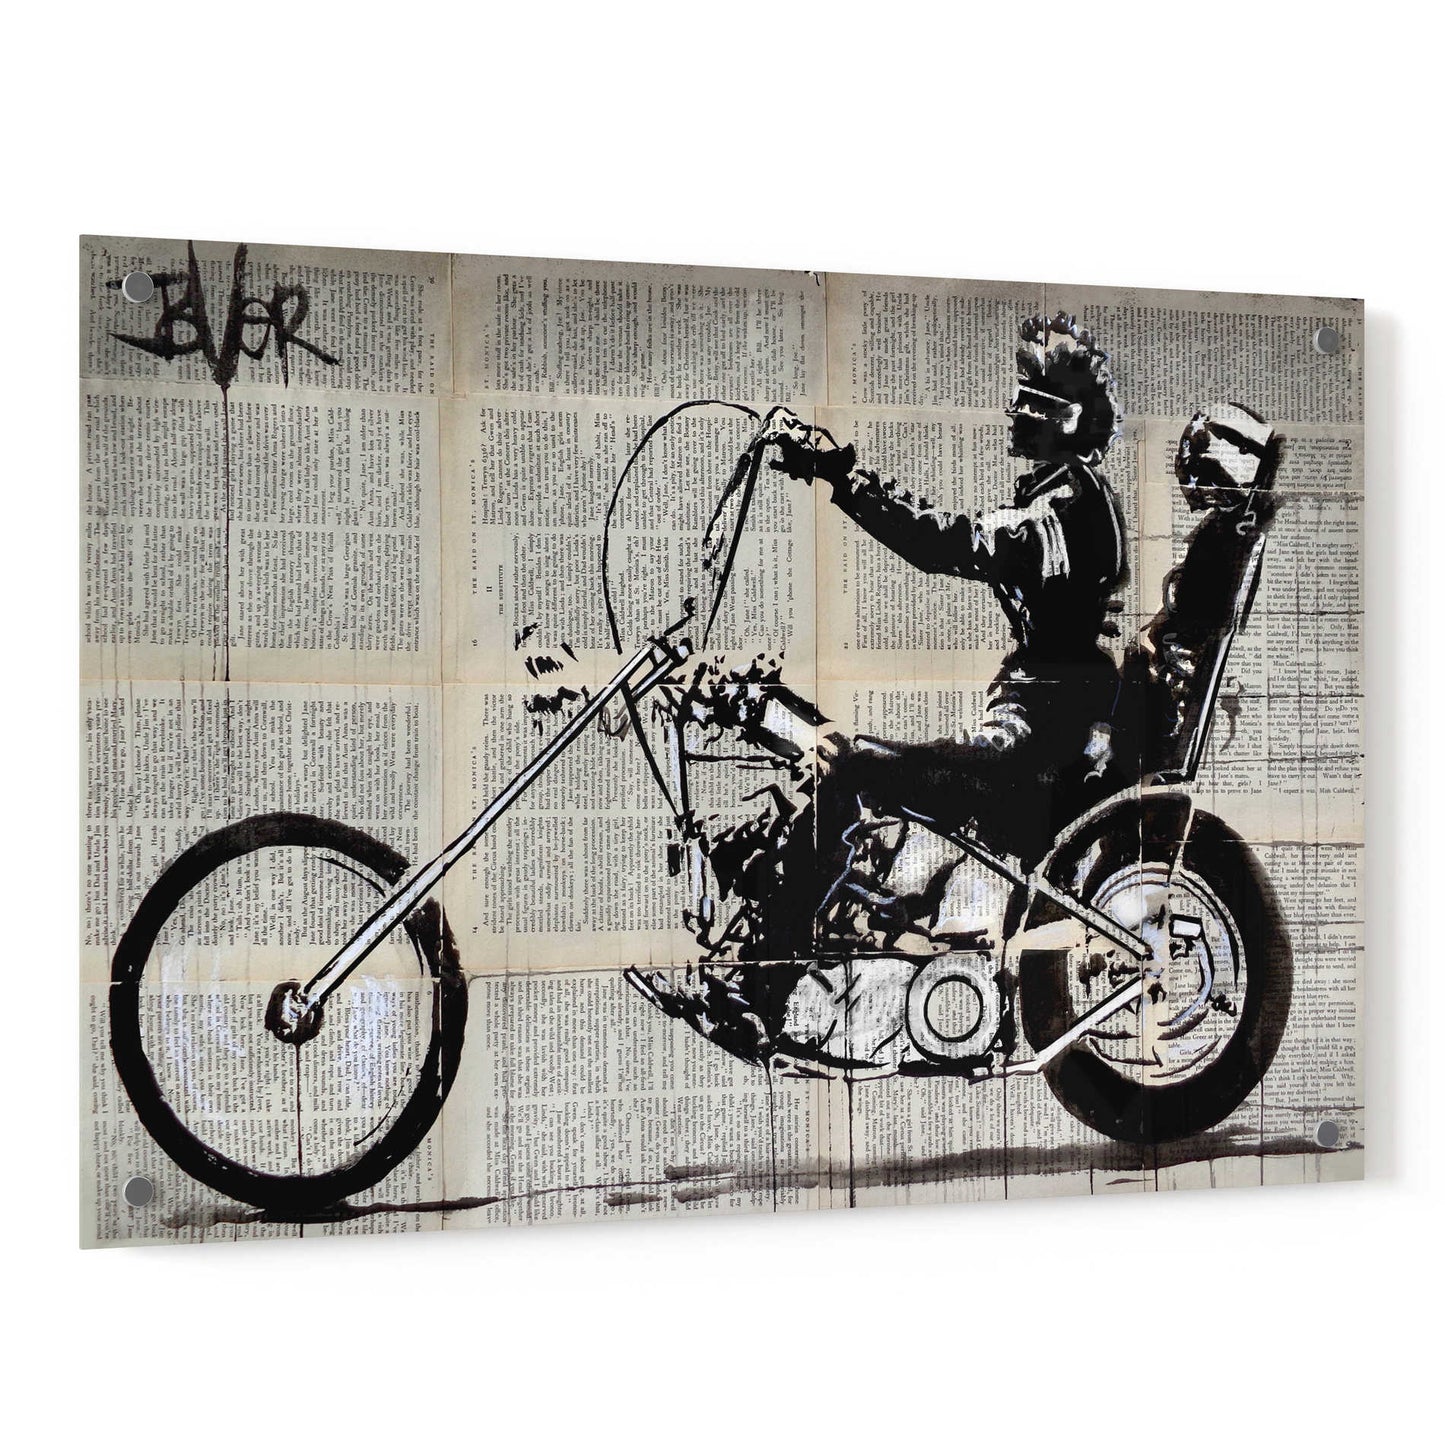 Epic Art 'Get Your Motor Running' by Loui Jover, Acrylic Glass Wall Art,36x24